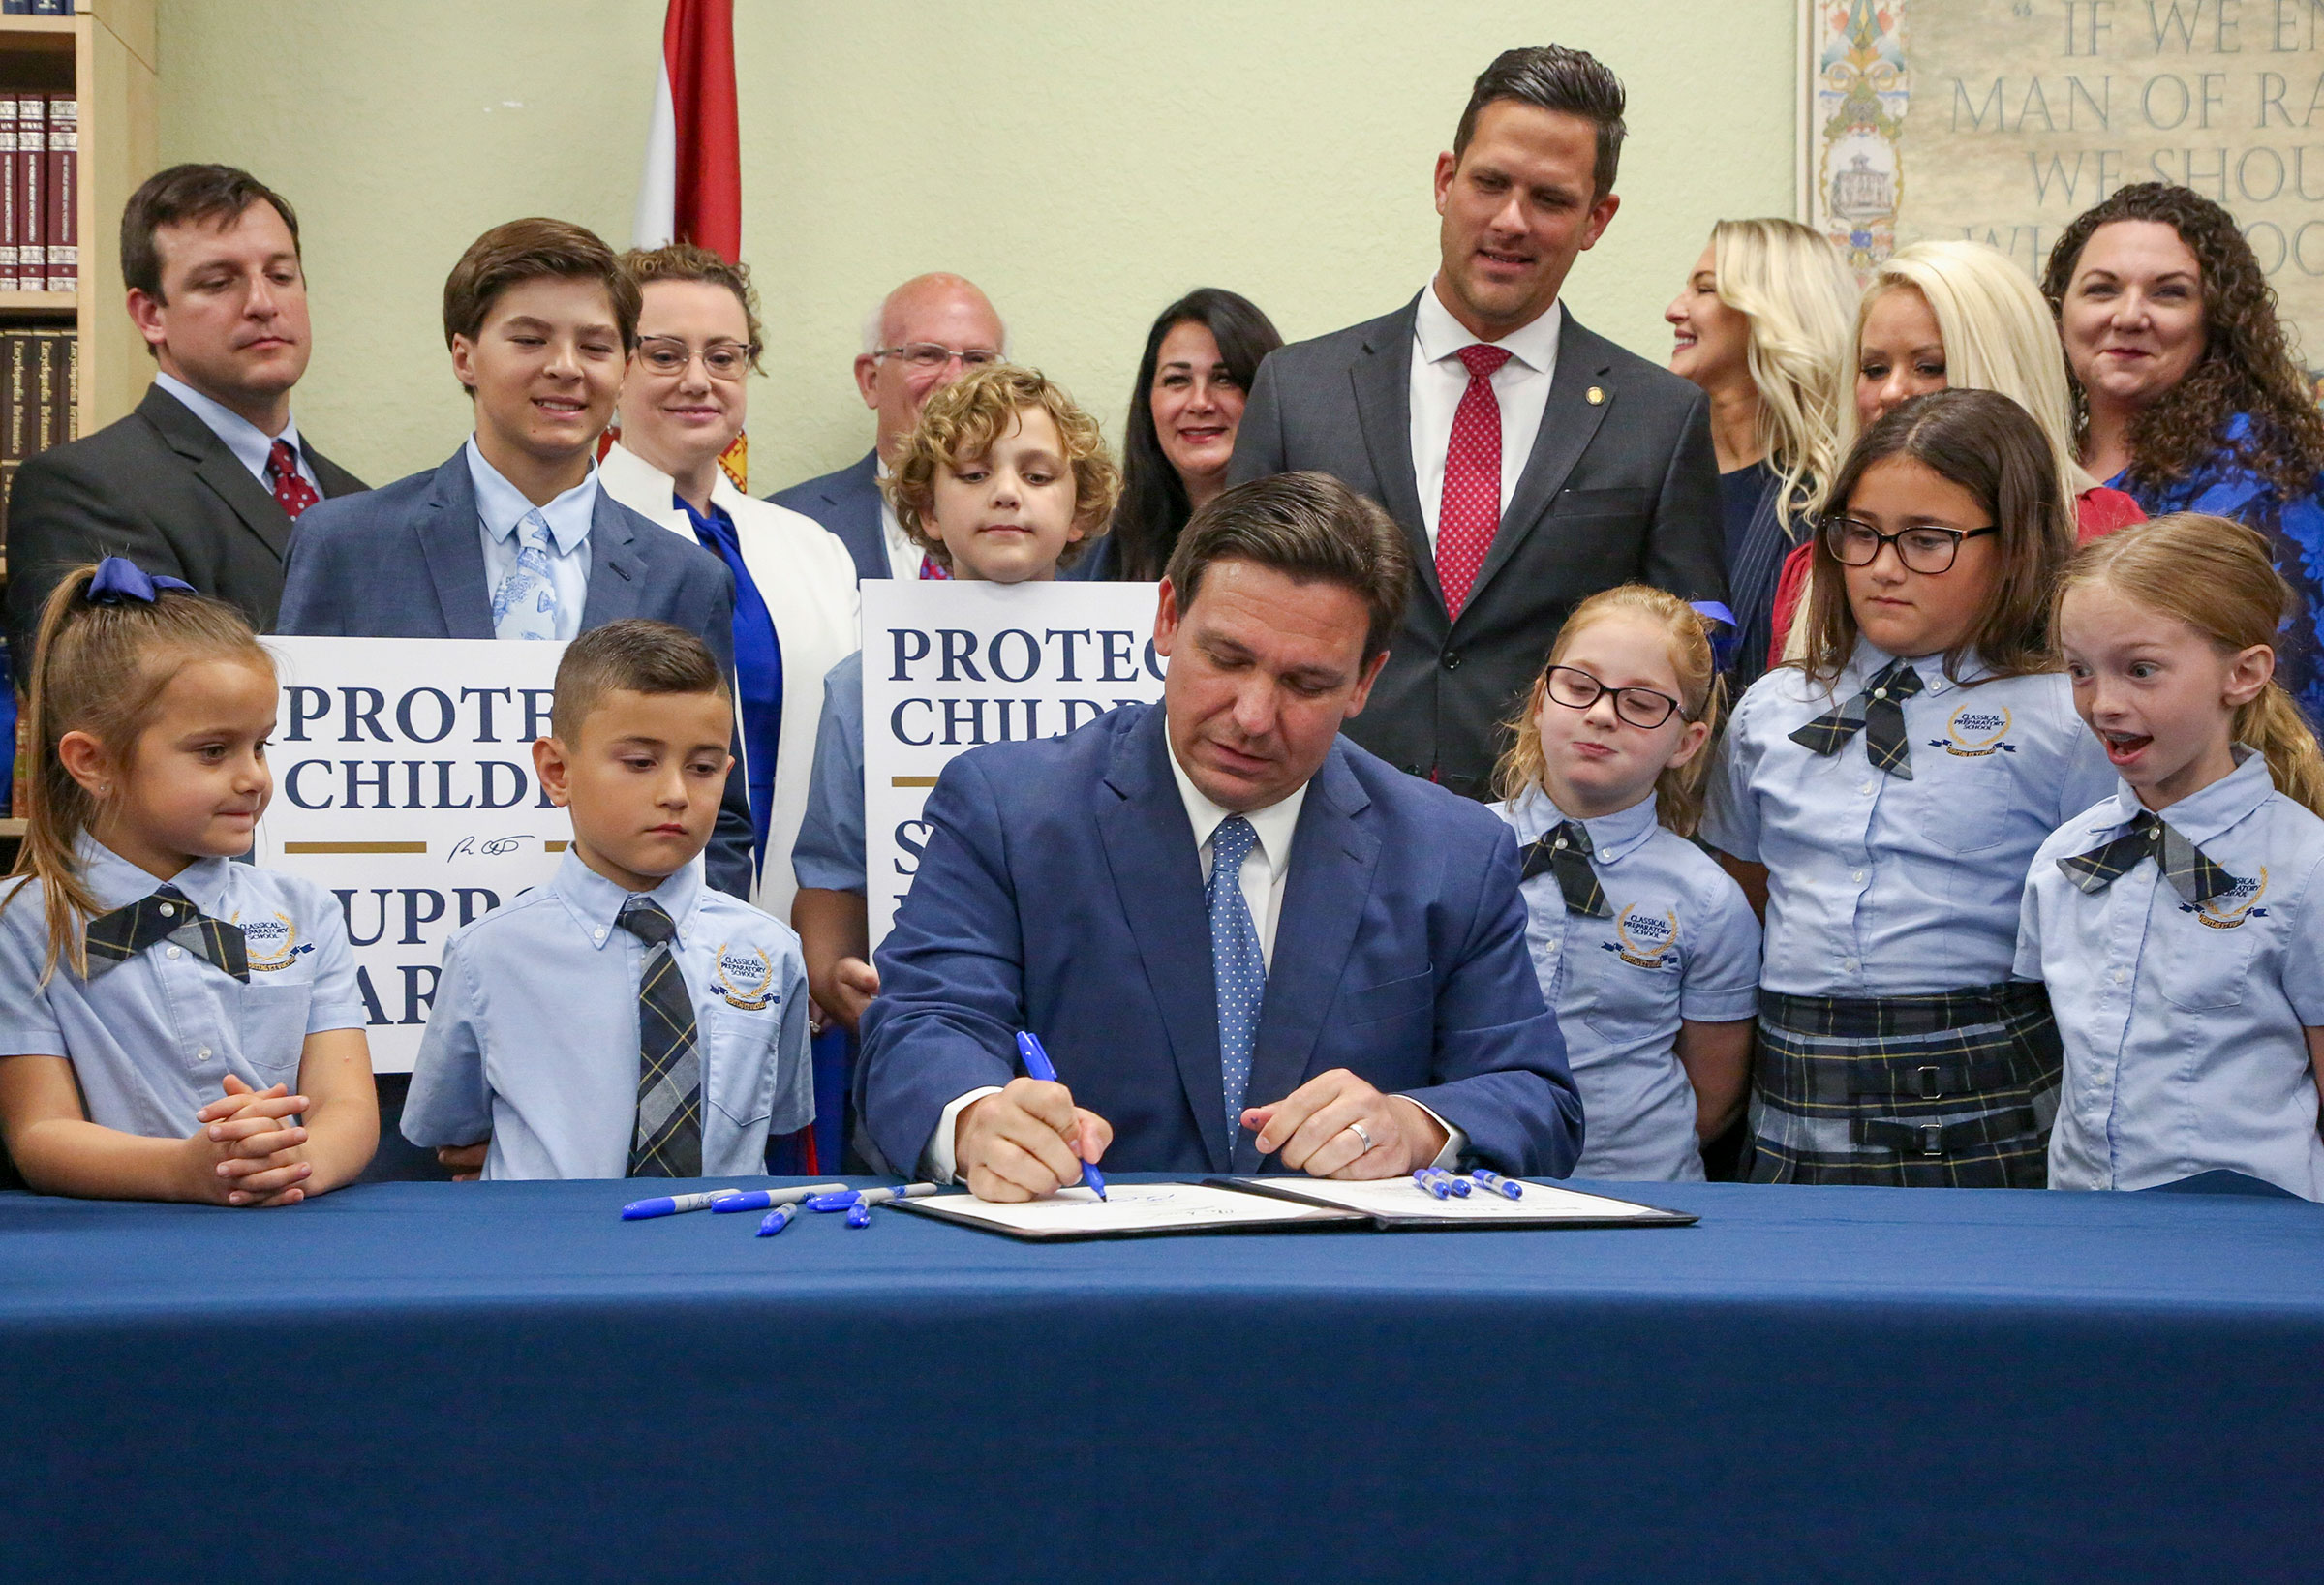 DeSantis signs the Parental Rights in Education bill at Classical Preparatory school on March 28, 2022 (Douglas R. Clifford—Tampa Bay Times/AP)